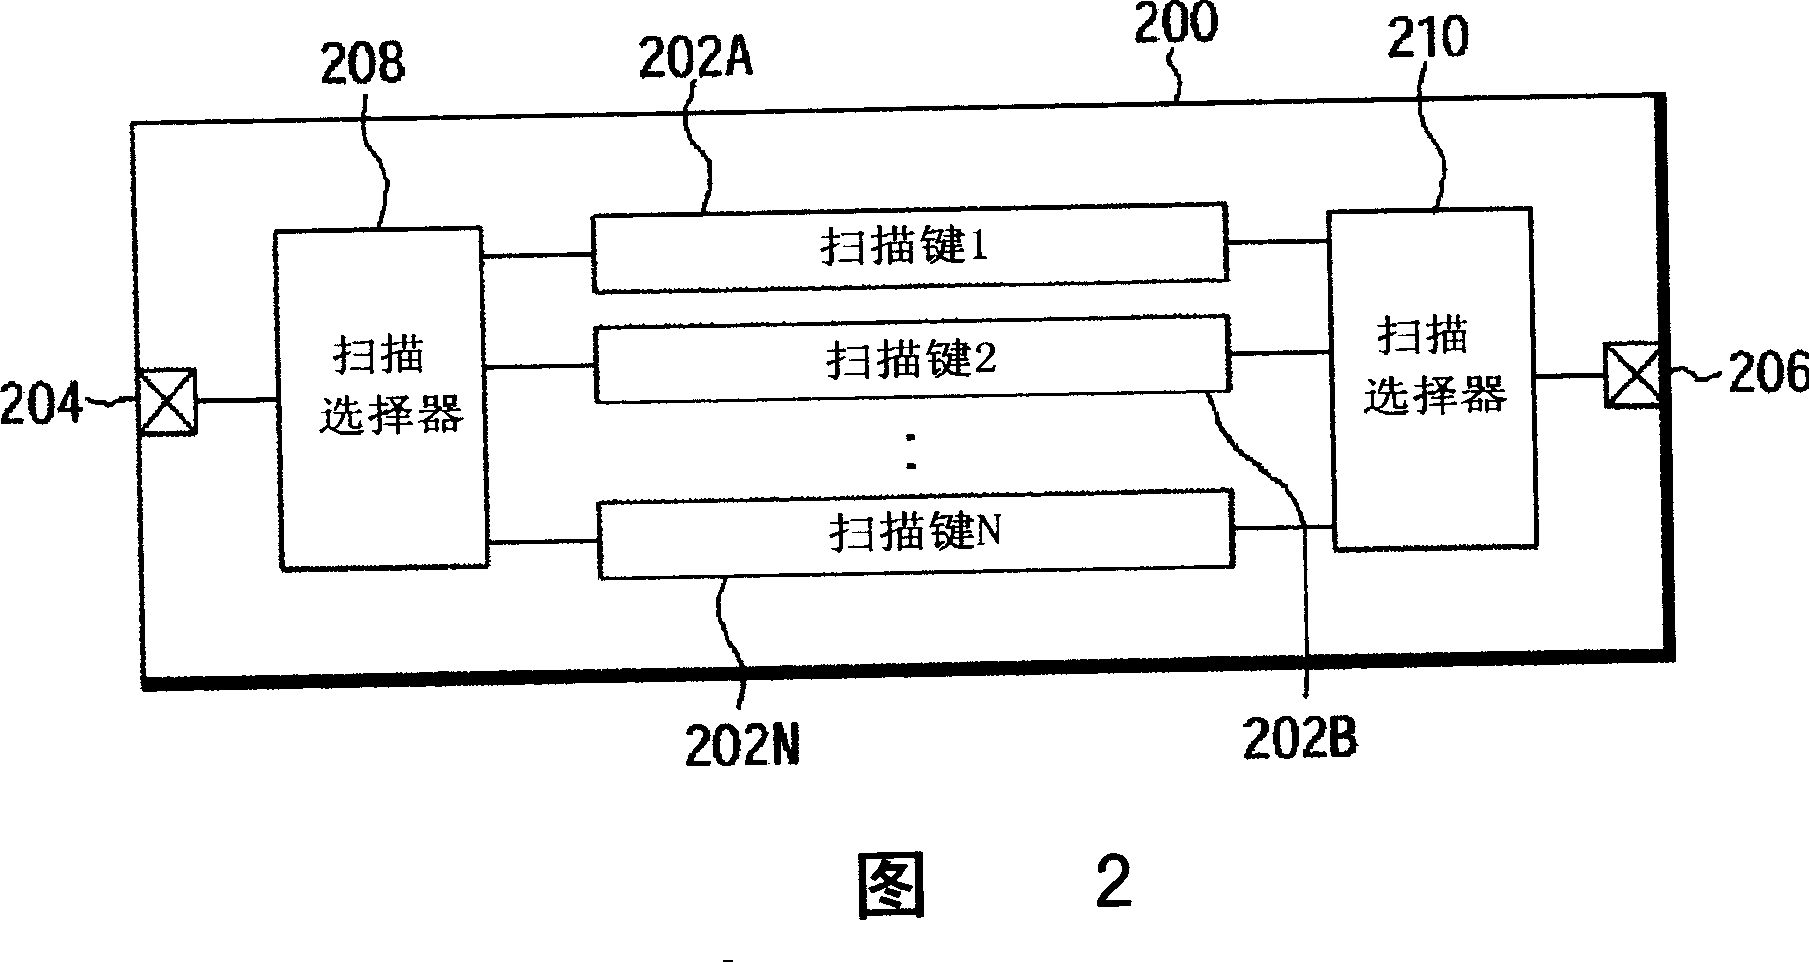 Device with programmable scan chain for use in multi-chip assembly and programming method therefor